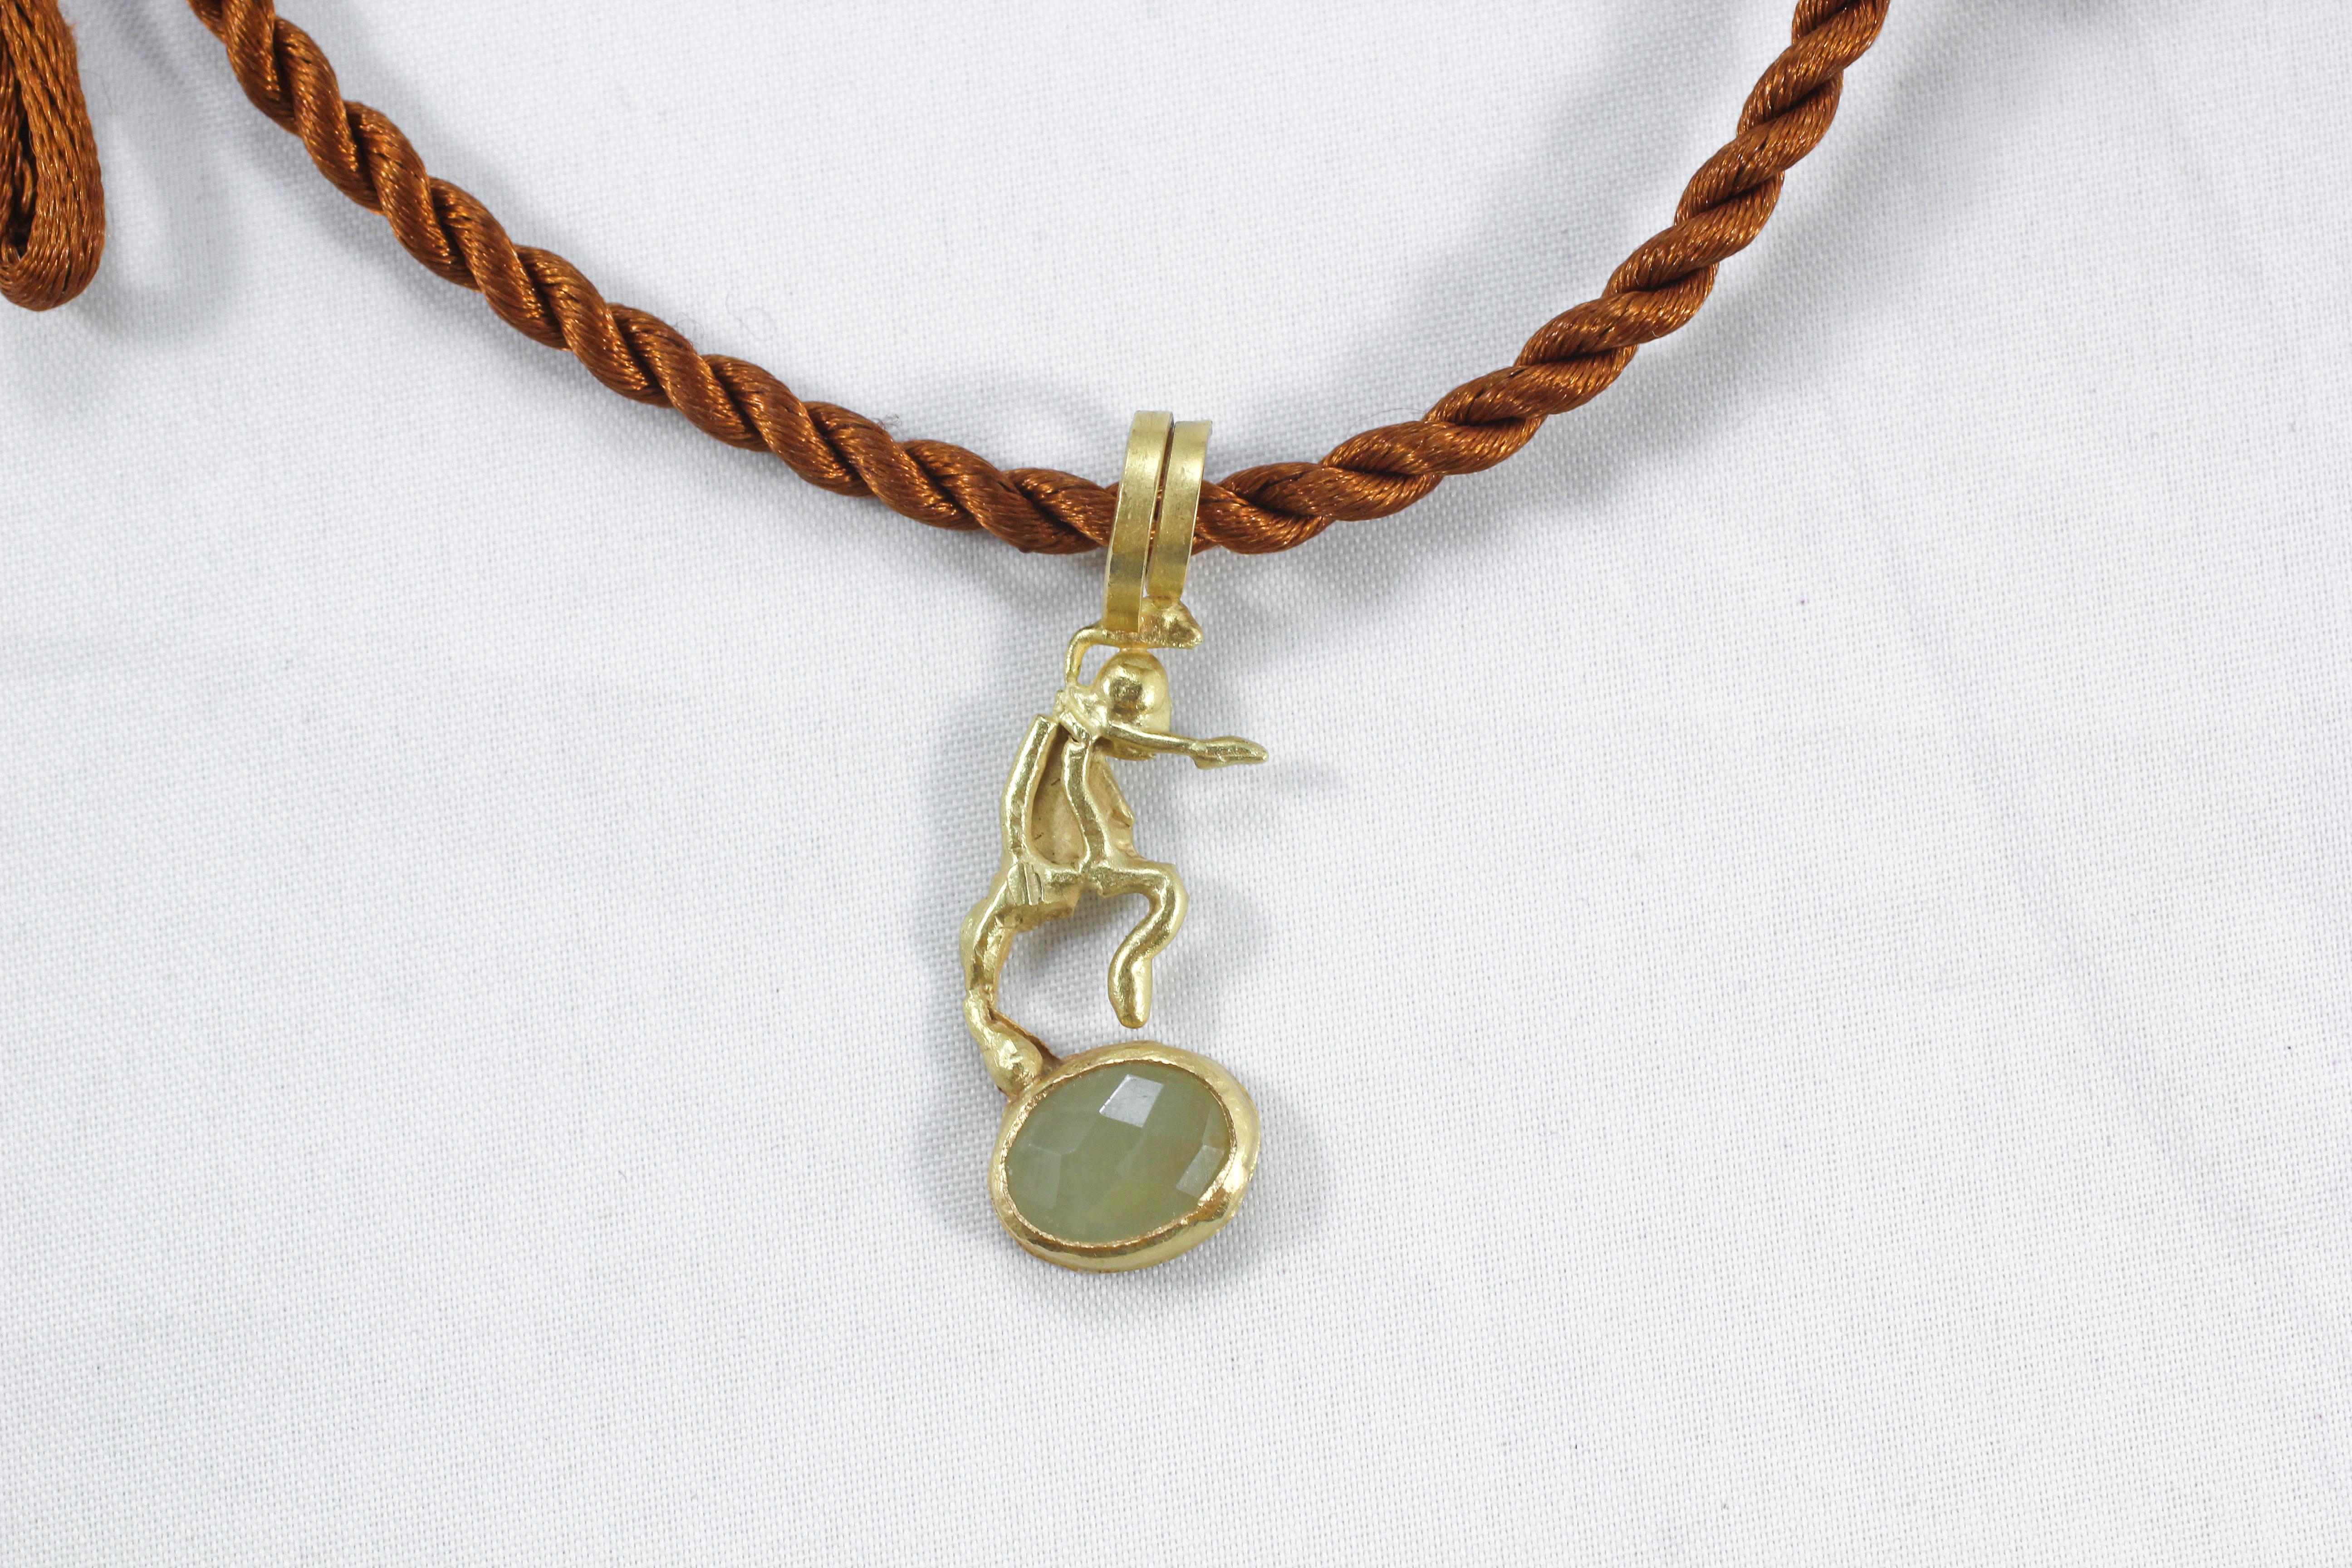 DANCE, necklace pendant enhancer. Whimsical, modernist style, minimalist pendant or necklace enhancer. Will arrive with a silk cord. Created for a modern person. Show your sense of humor with these playful pendants while making a stylish statement.